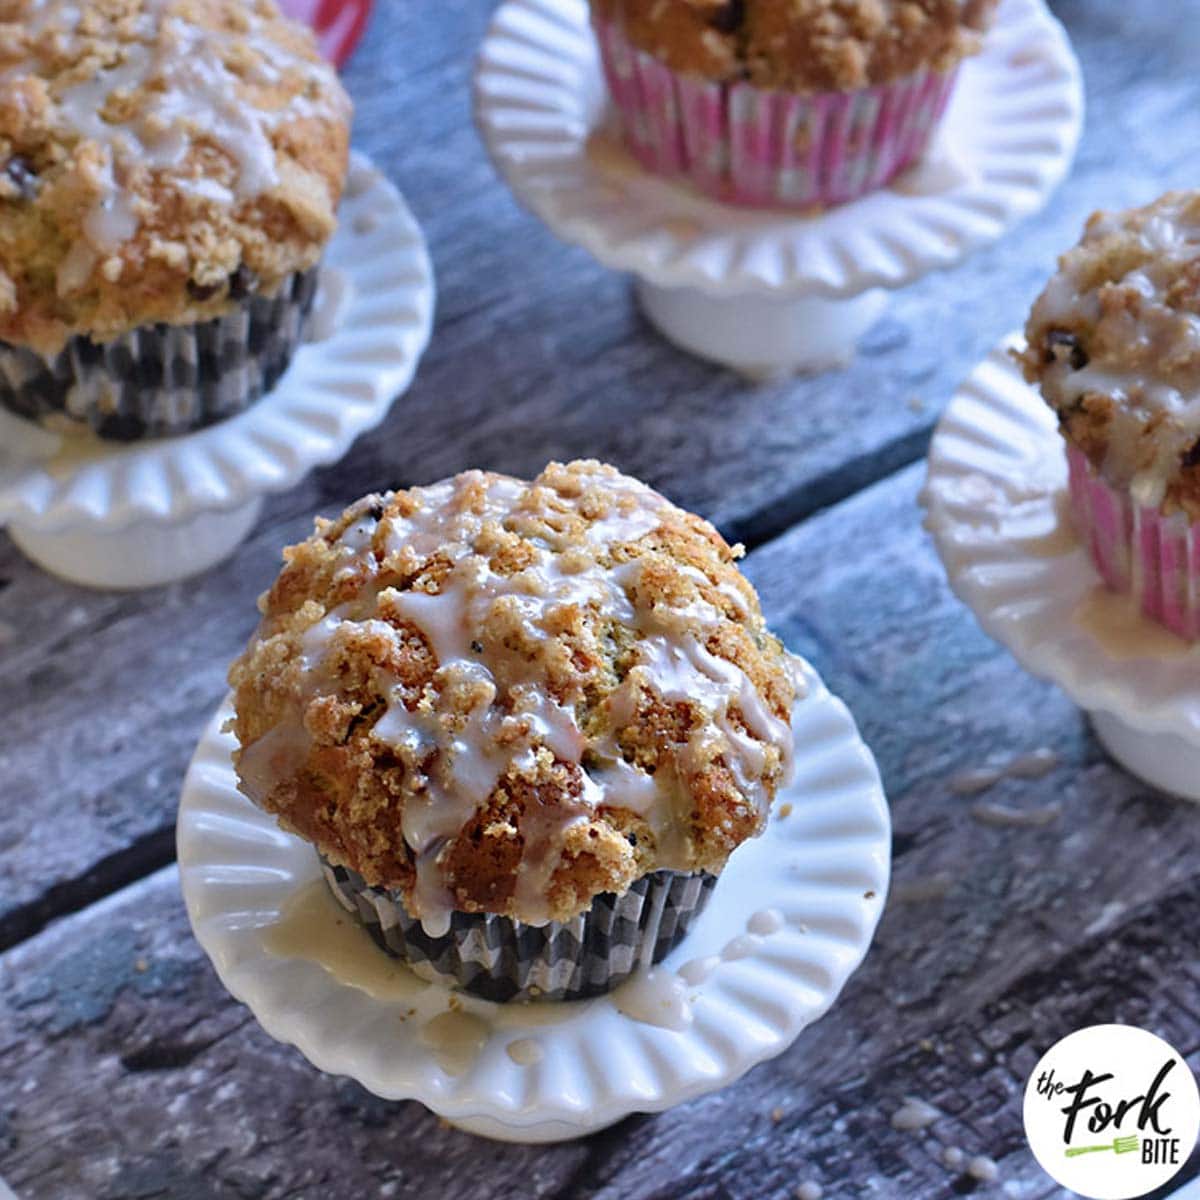 These incredibly moist, soft Banana Chocolate Chip Muffins are topped with (streusel) crumb toppings and then drizzled with a vanilla icing. Perfect for breakfast or a snack!